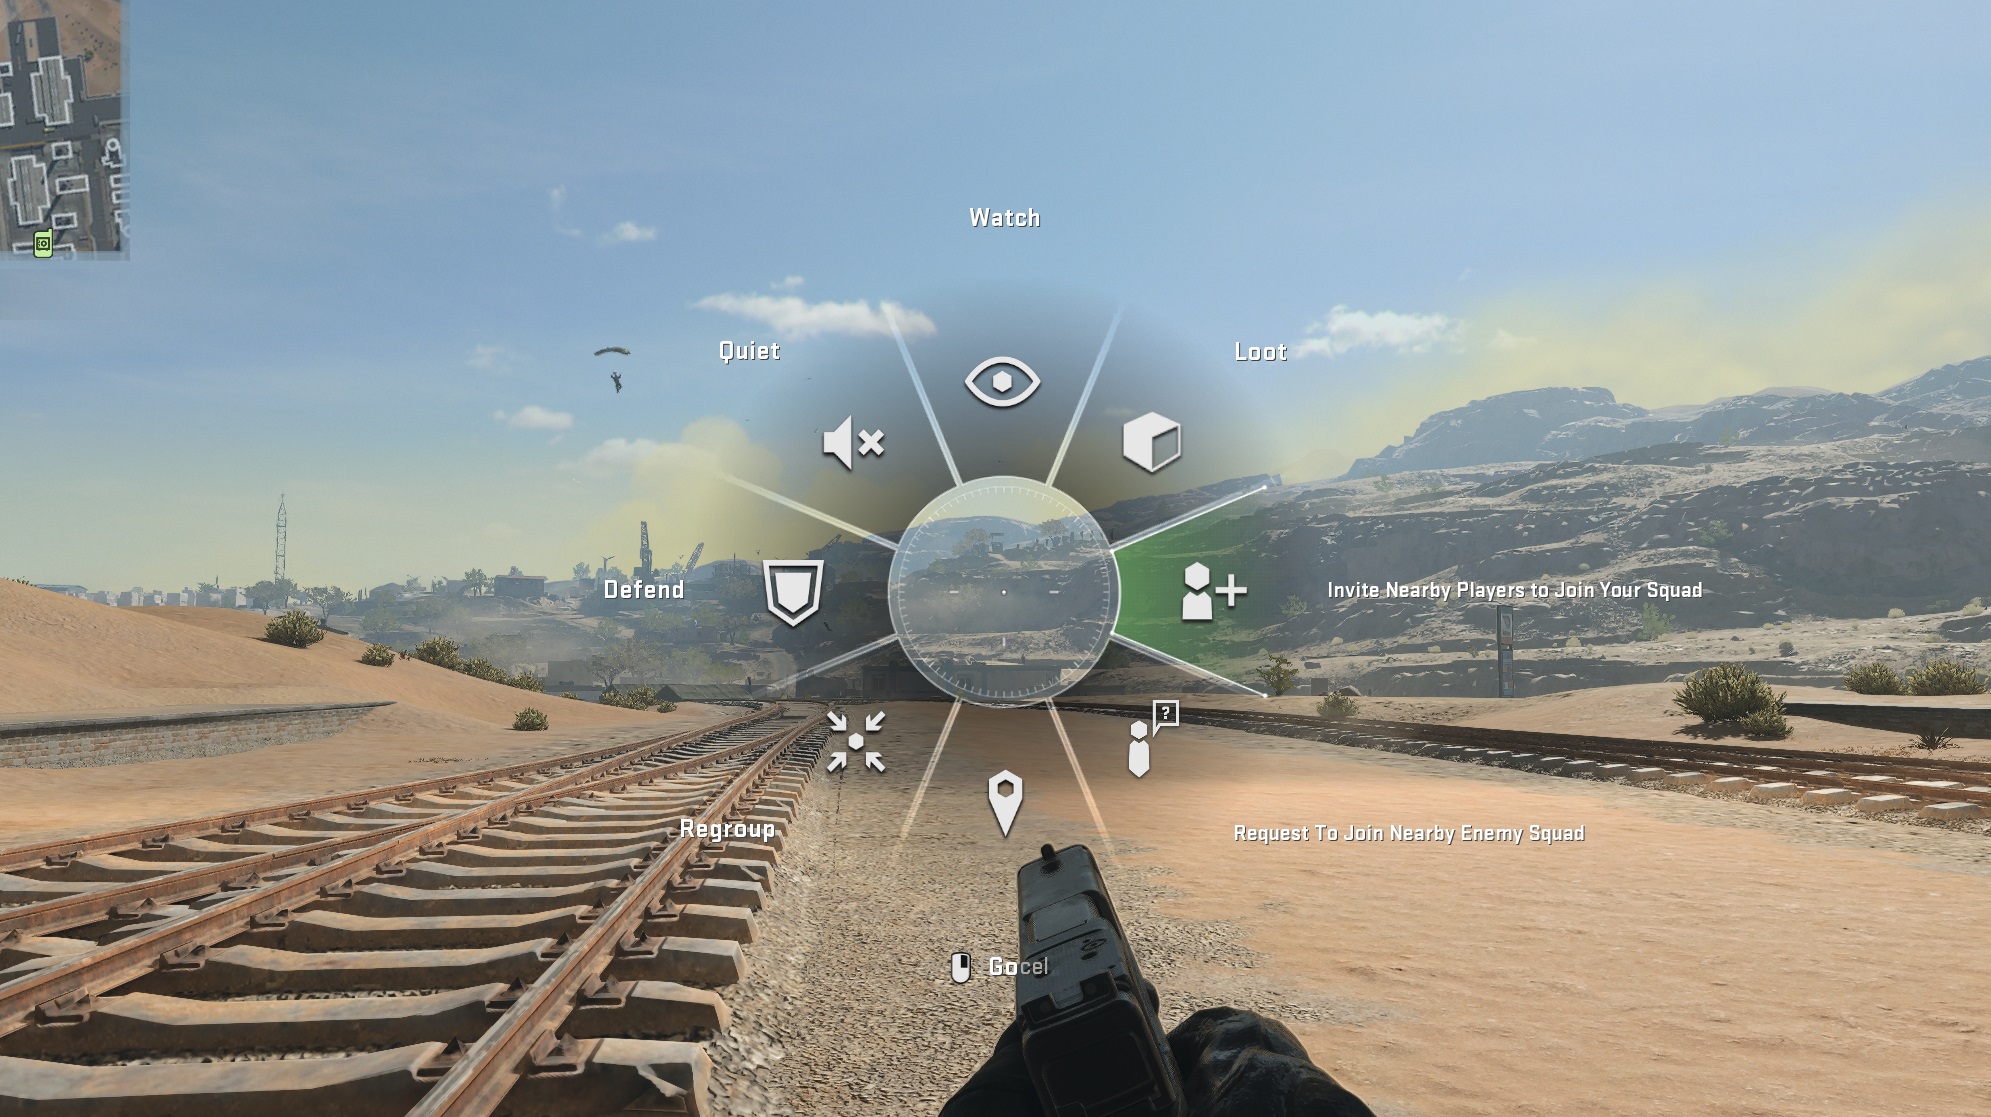 Call of Duty: Warzone 2 - Radial ping menu showing the right wedge selected which reads 